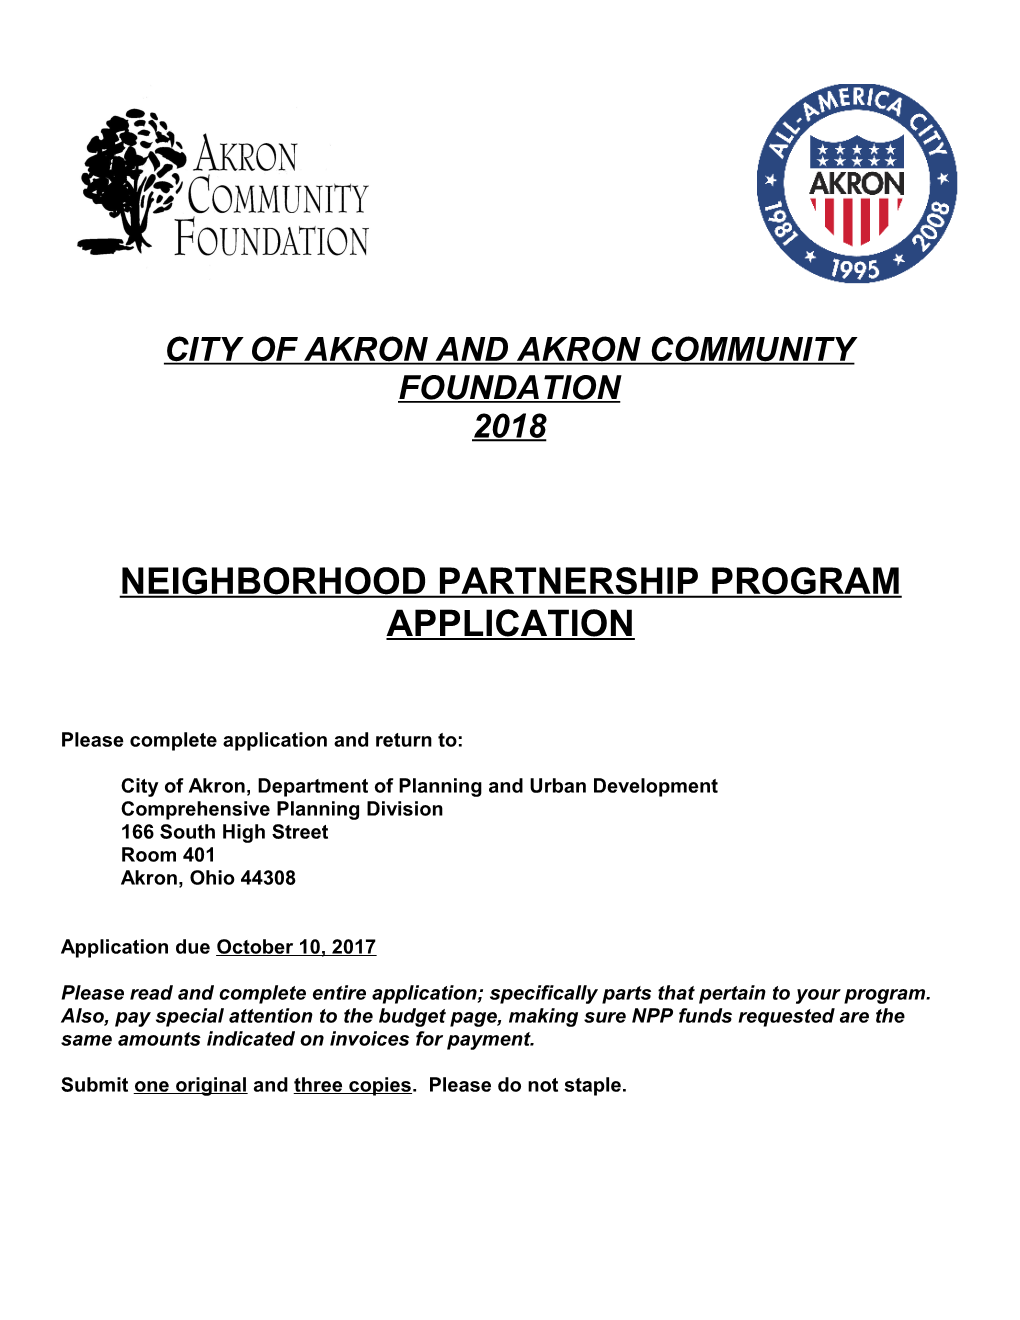 City of Akron and Akron Community Foundation